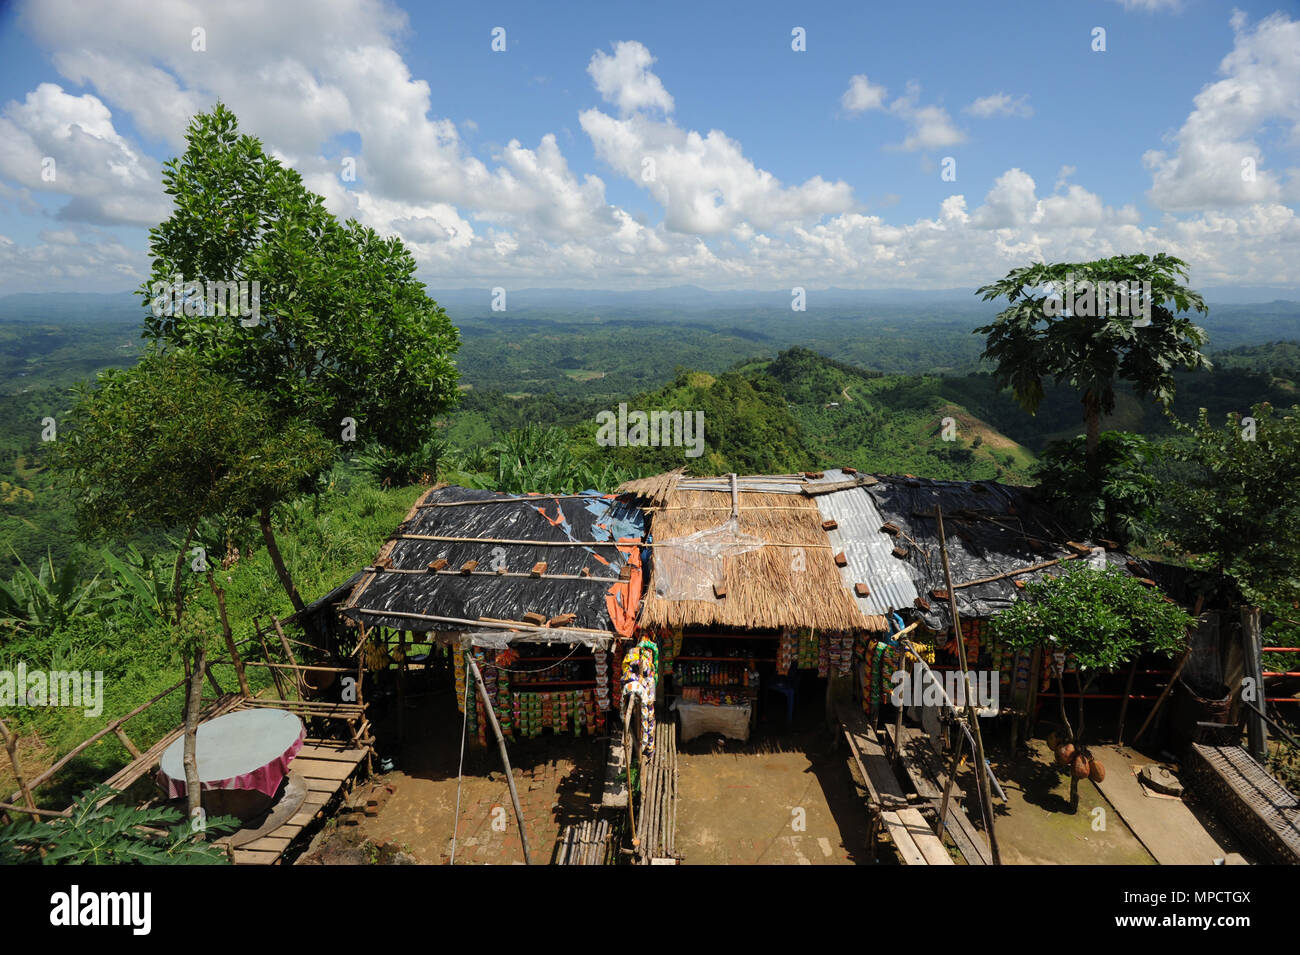 Bandarban, Bangladesh - September 30, 2010: The Landscape view of Bandarban is regarded as one of the most attractive travel destinations in Banglades Stock Photo